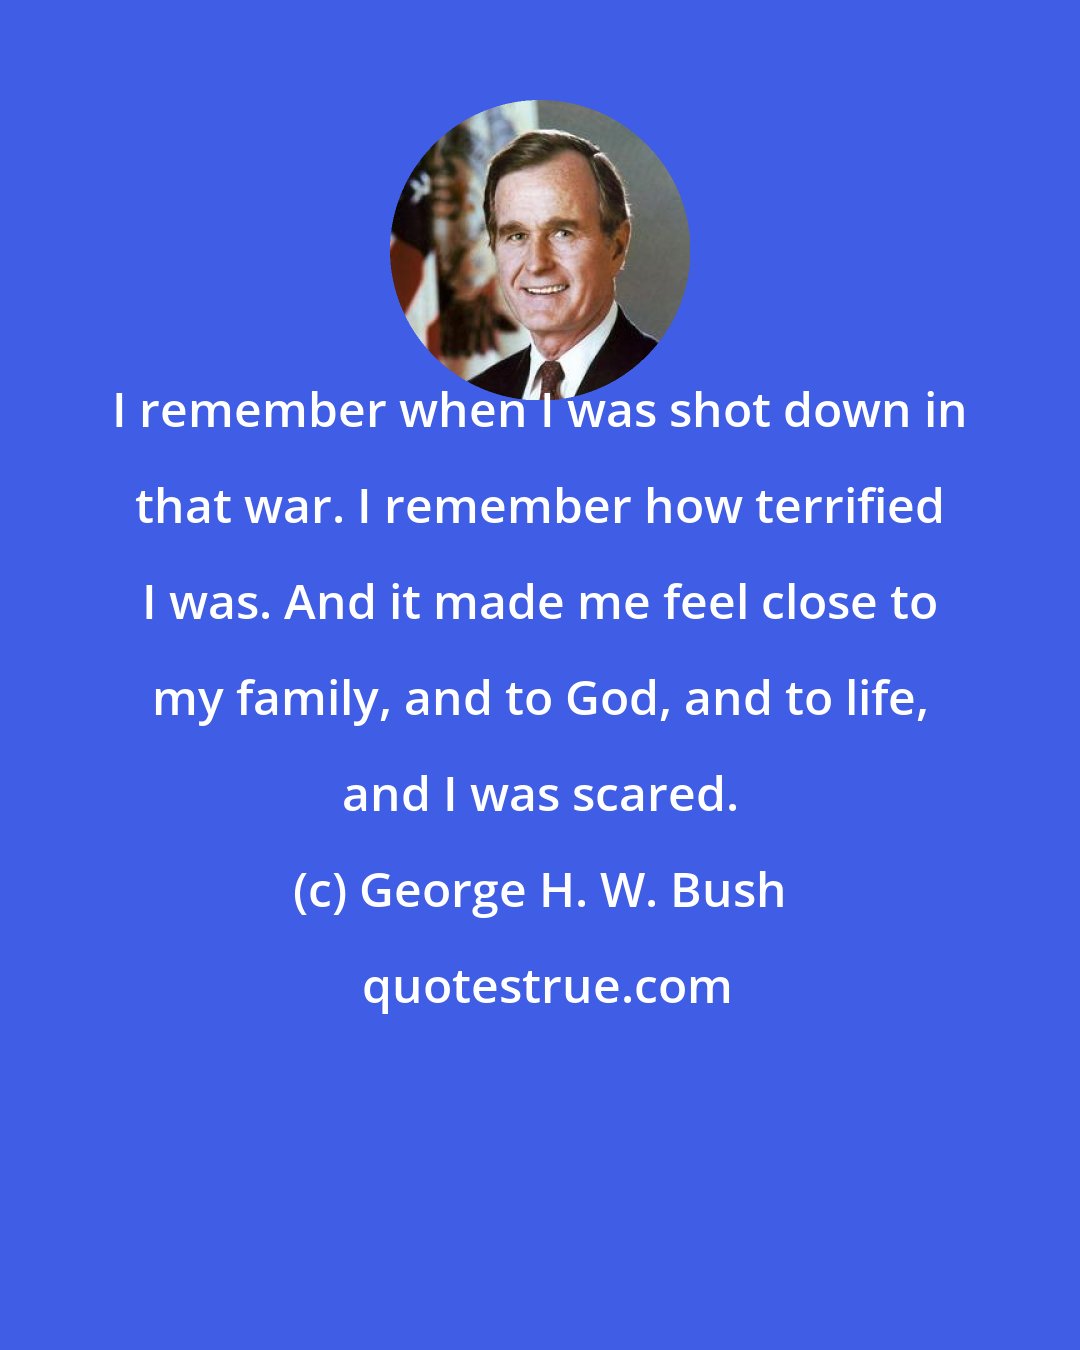 George H. W. Bush: I remember when I was shot down in that war. I remember how terrified I was. And it made me feel close to my family, and to God, and to life, and I was scared.